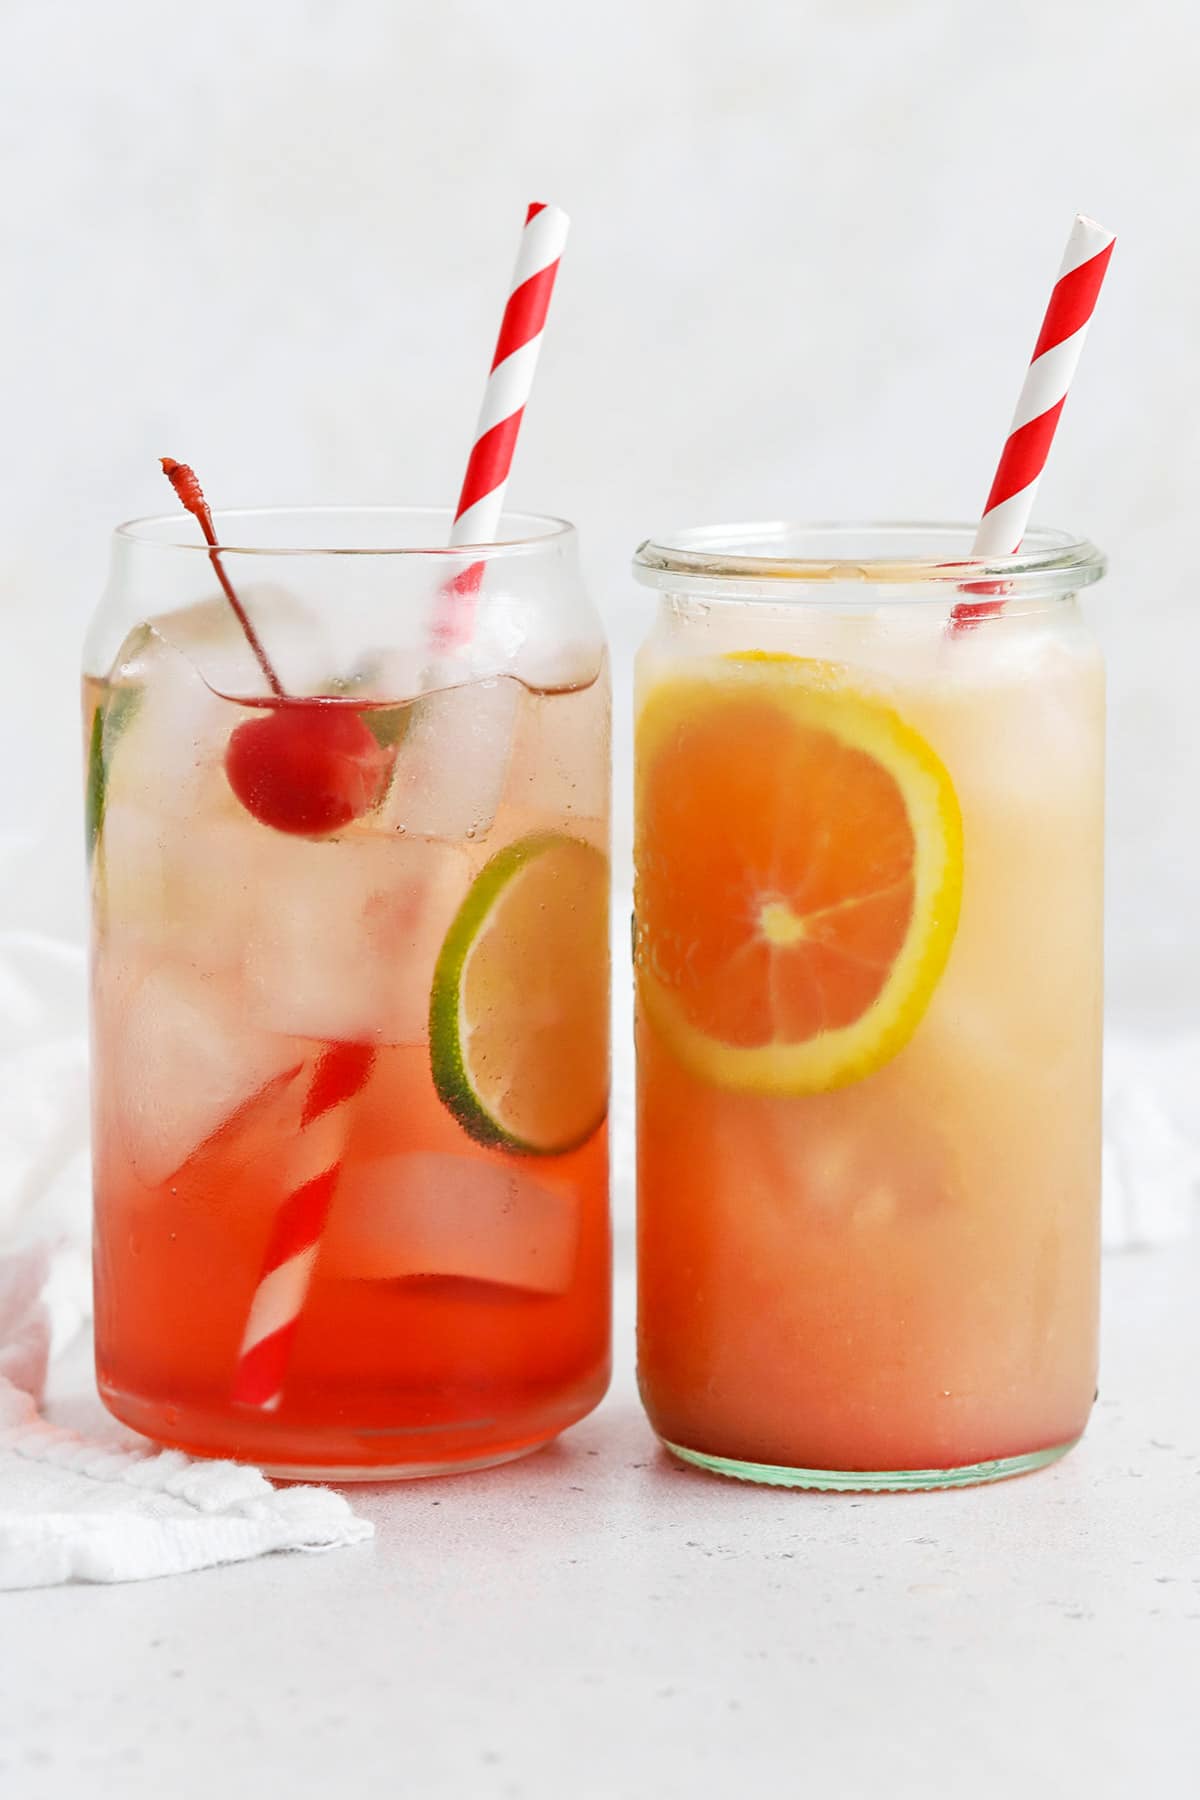 Two mocktails made with grenadine - a Shirley Temple and sweetheart sunrise